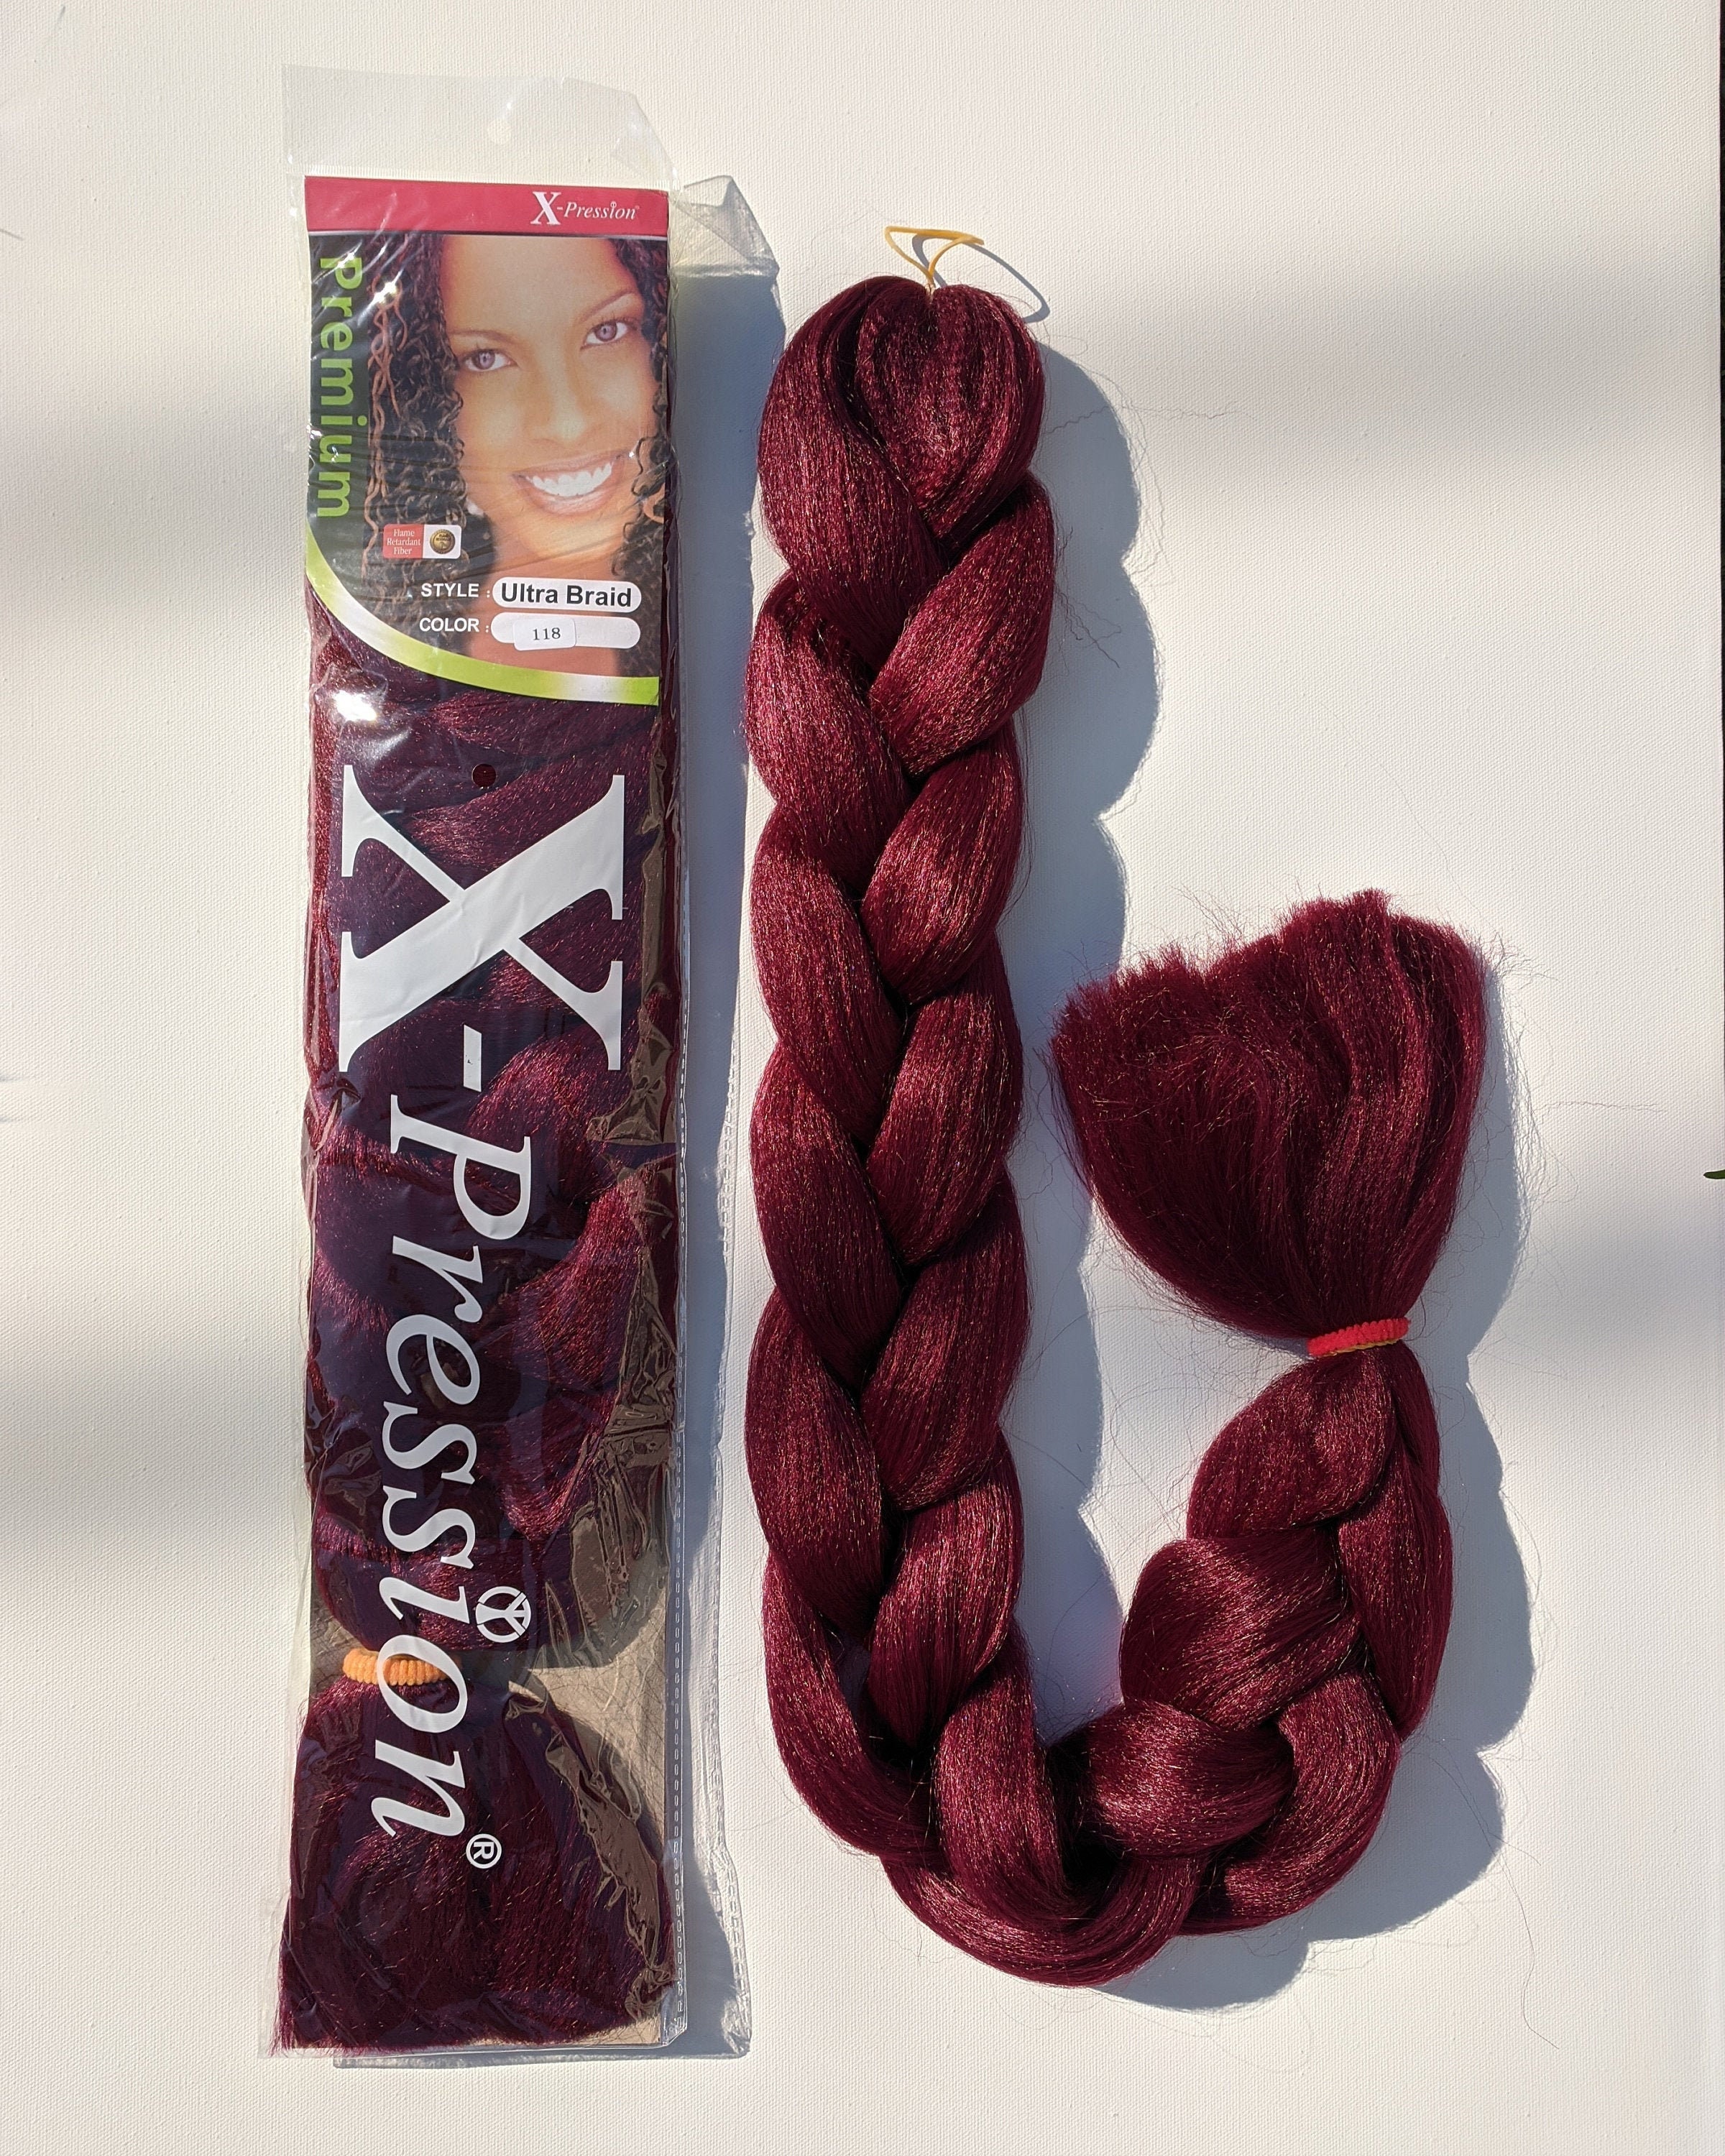 X-pression Xpressions Expressions Ultra Braid Hair Color 118 - Etsy India